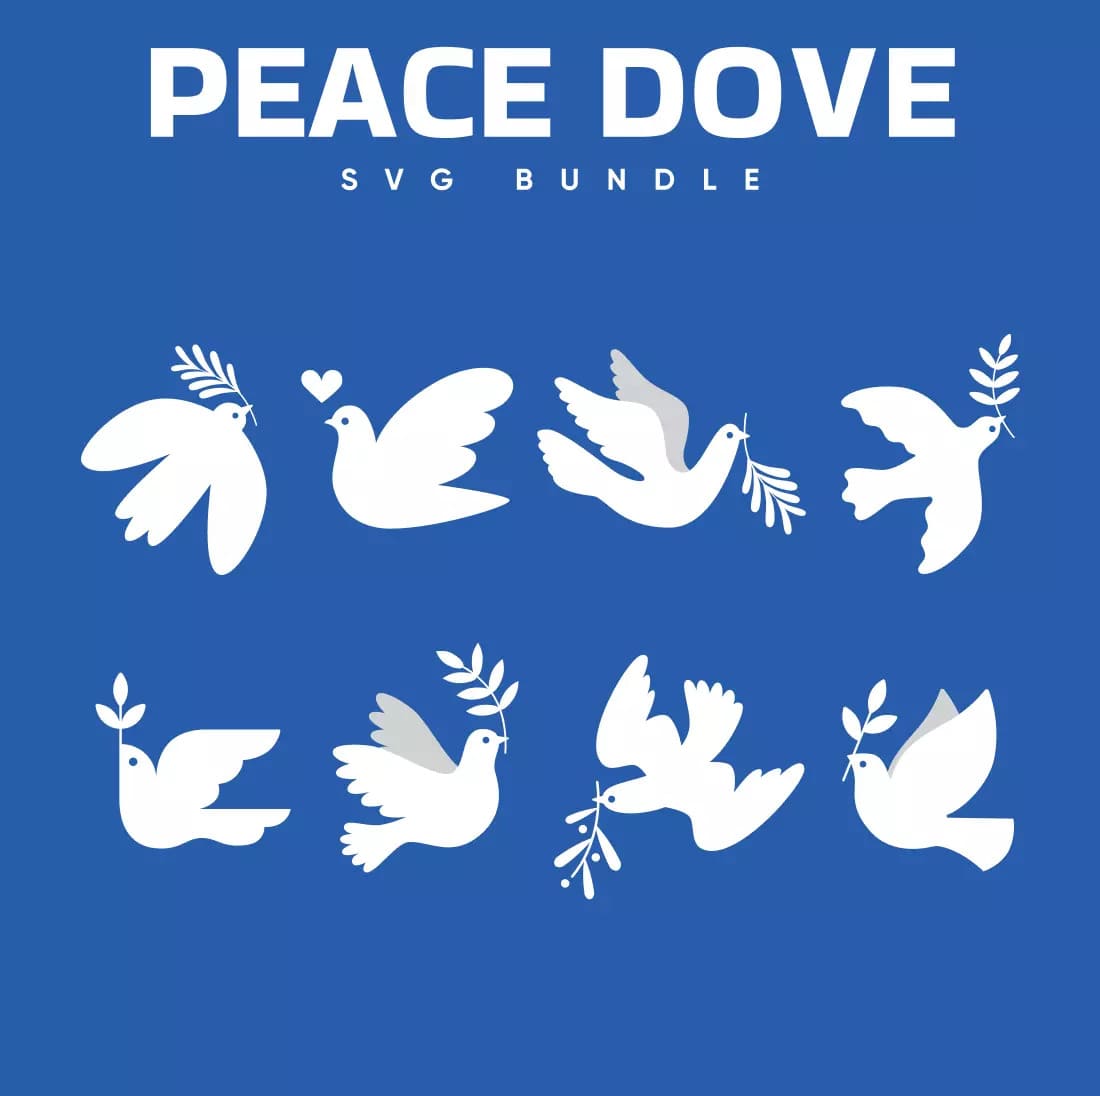 Blue background with white doves and leaves.